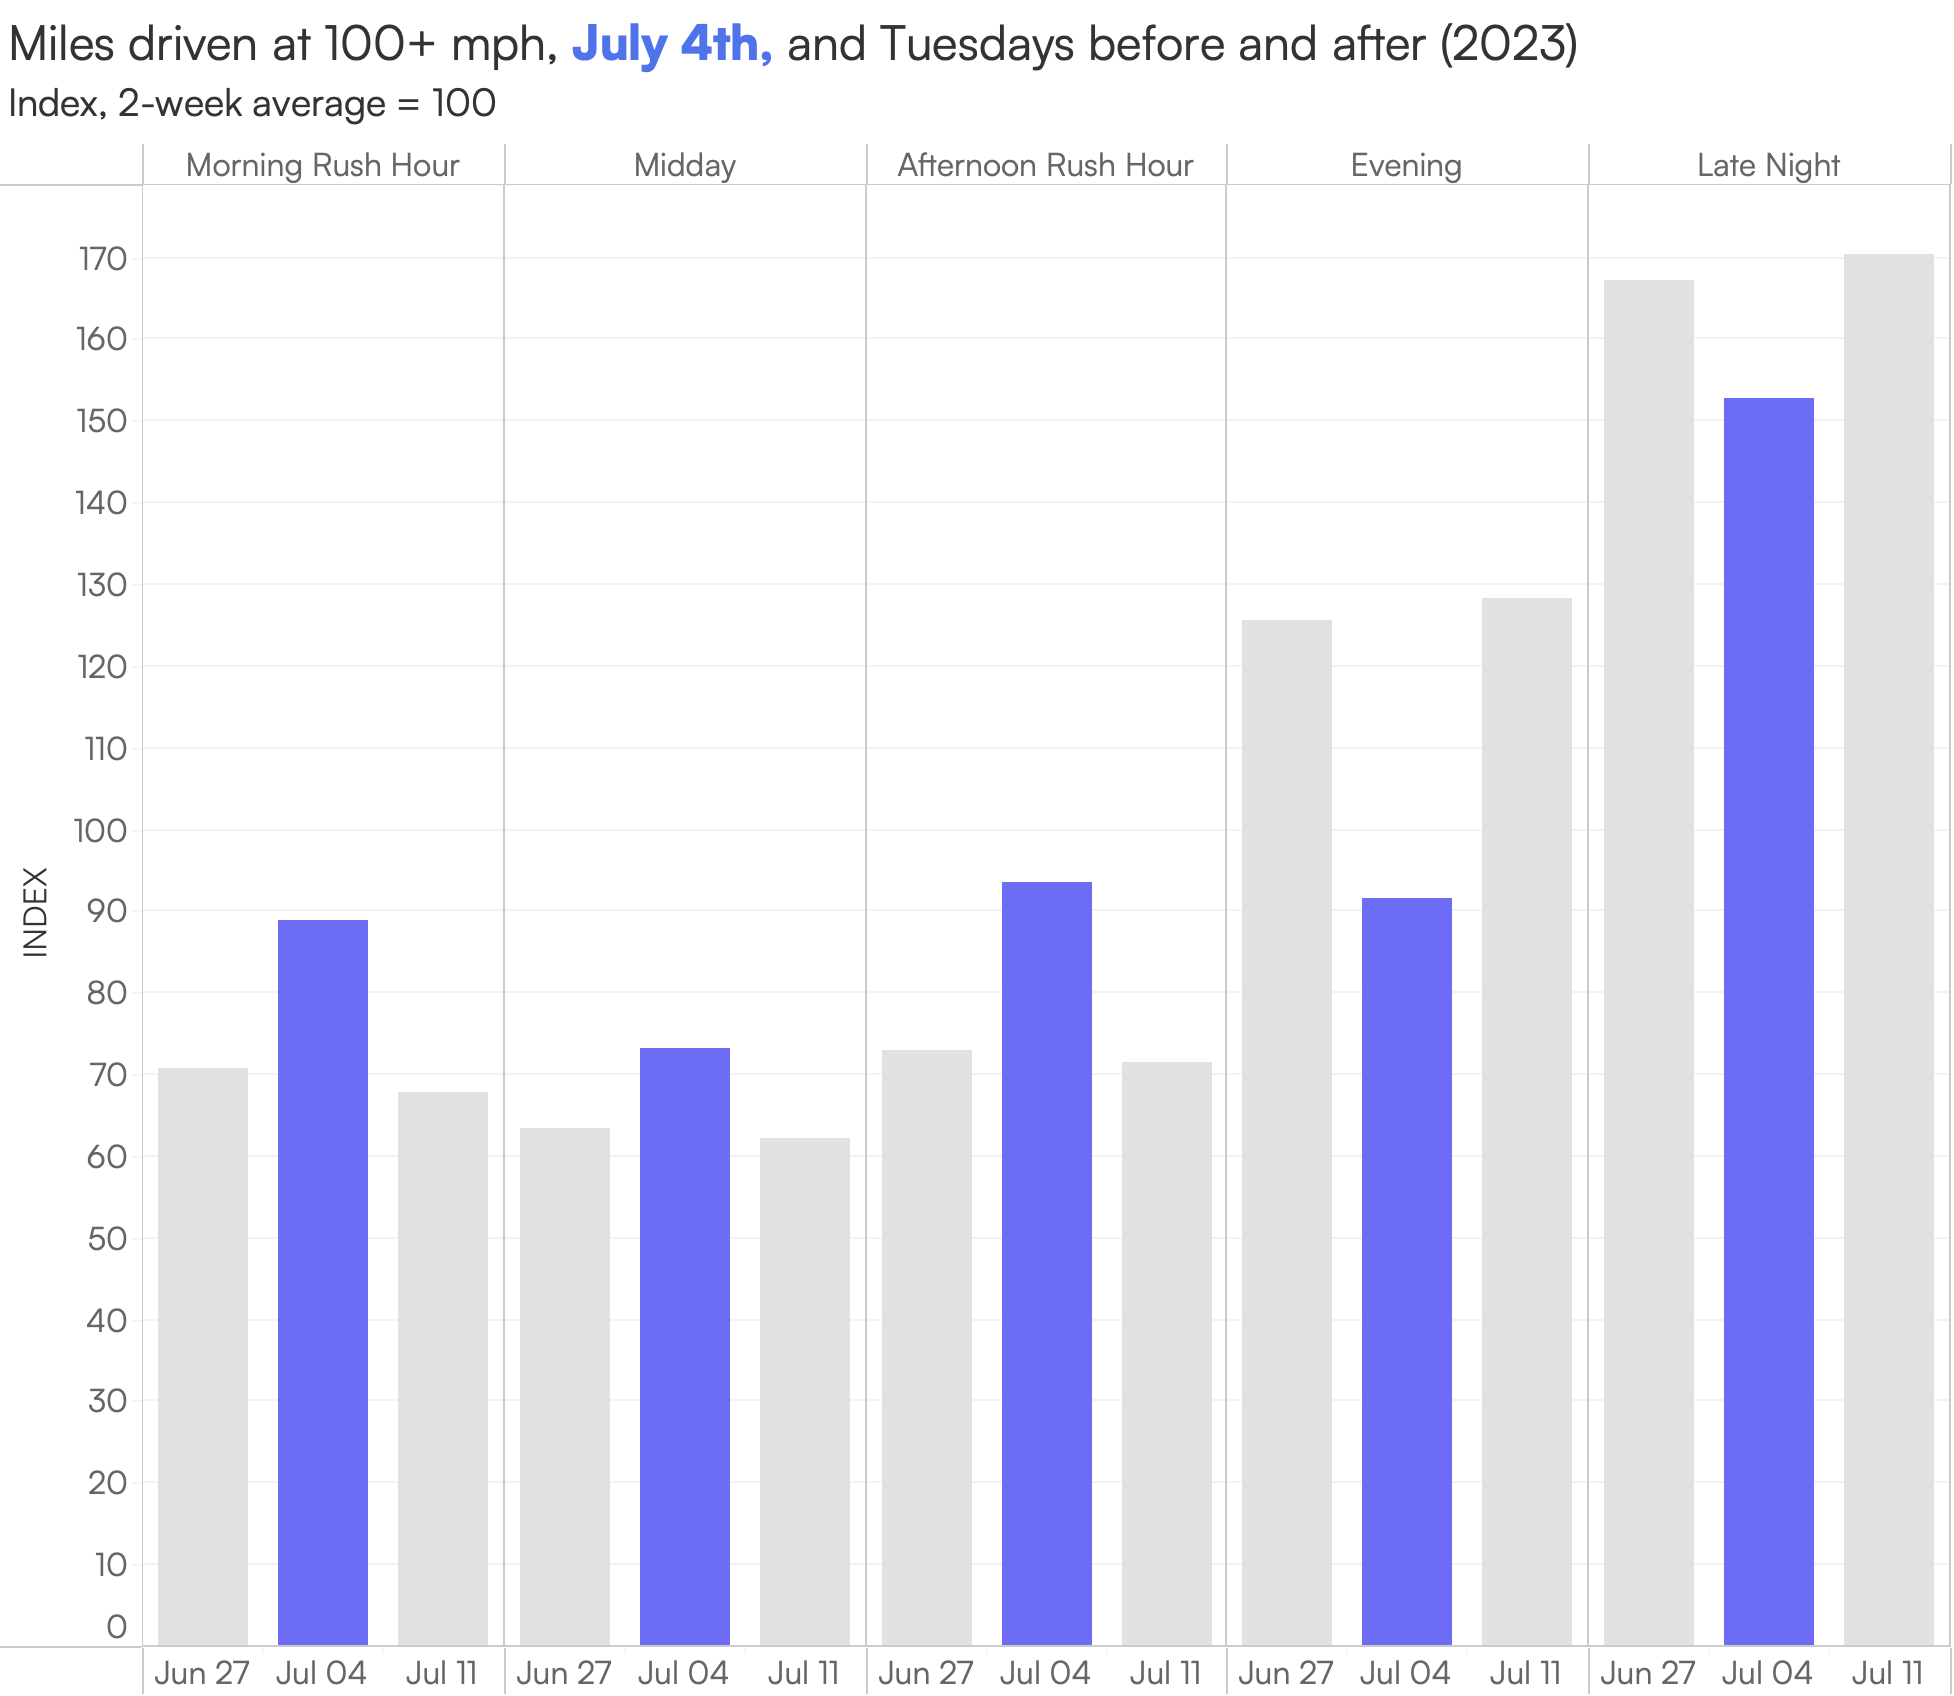 Graph showing miles driven at 100+ mph one July 4th, and Tuesdays before and after in 2023